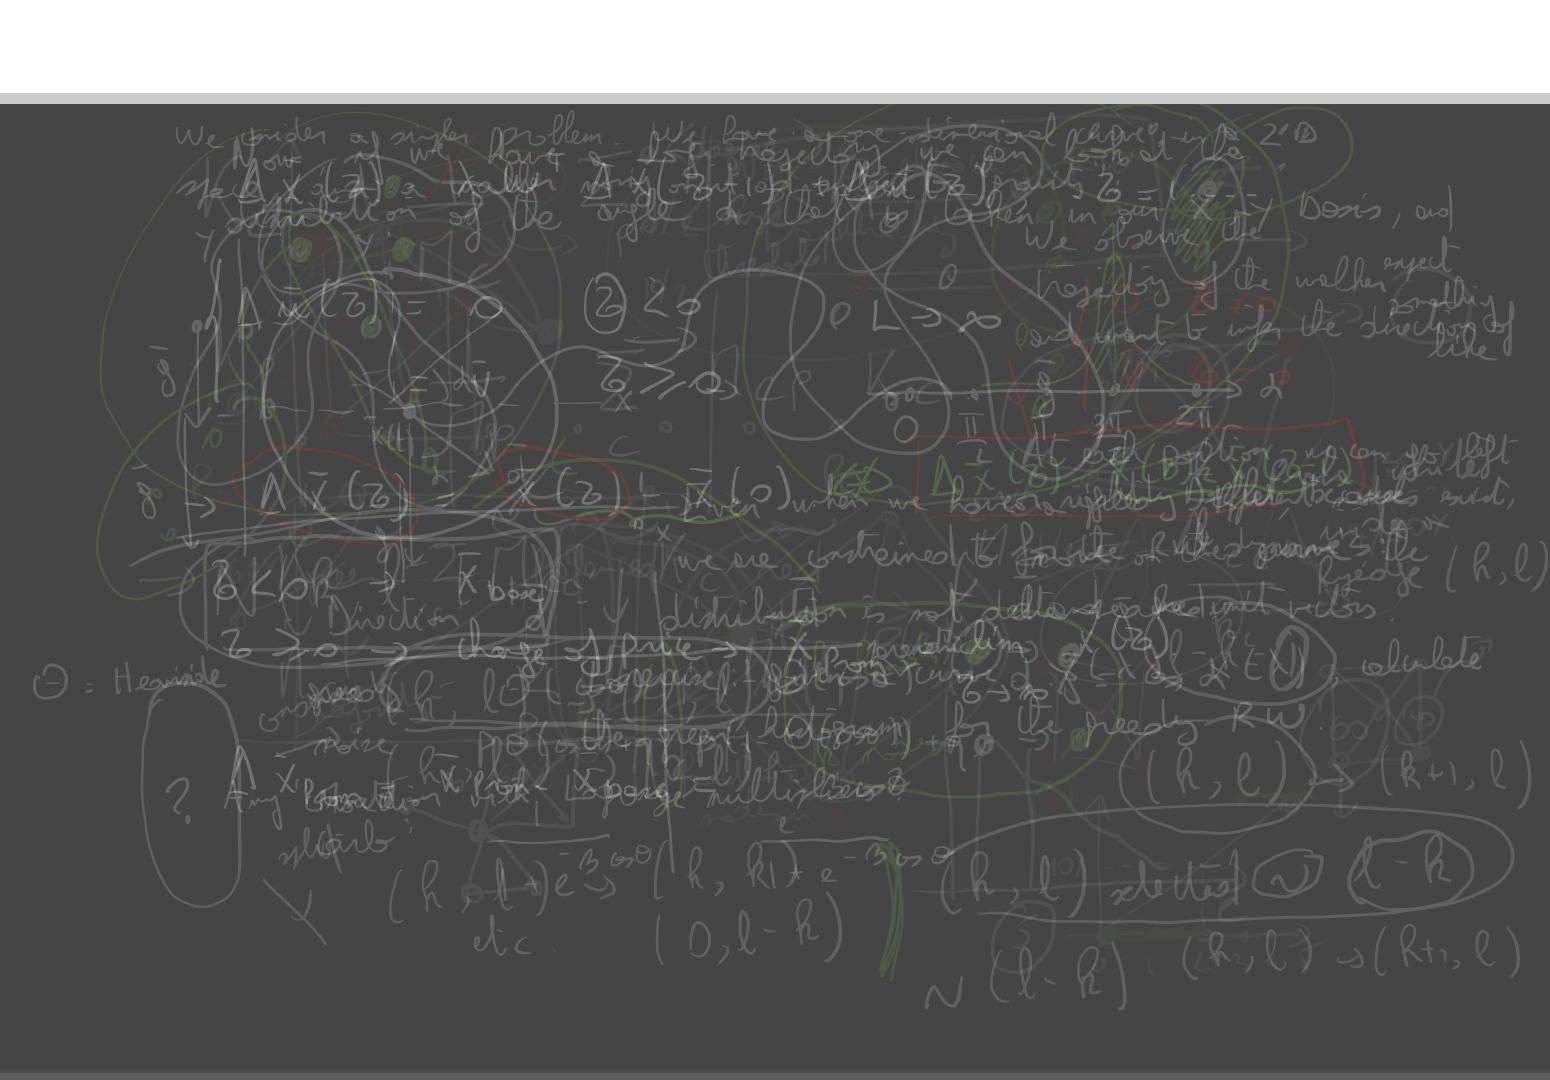 A blackboard with multiple layers of work overlaid.